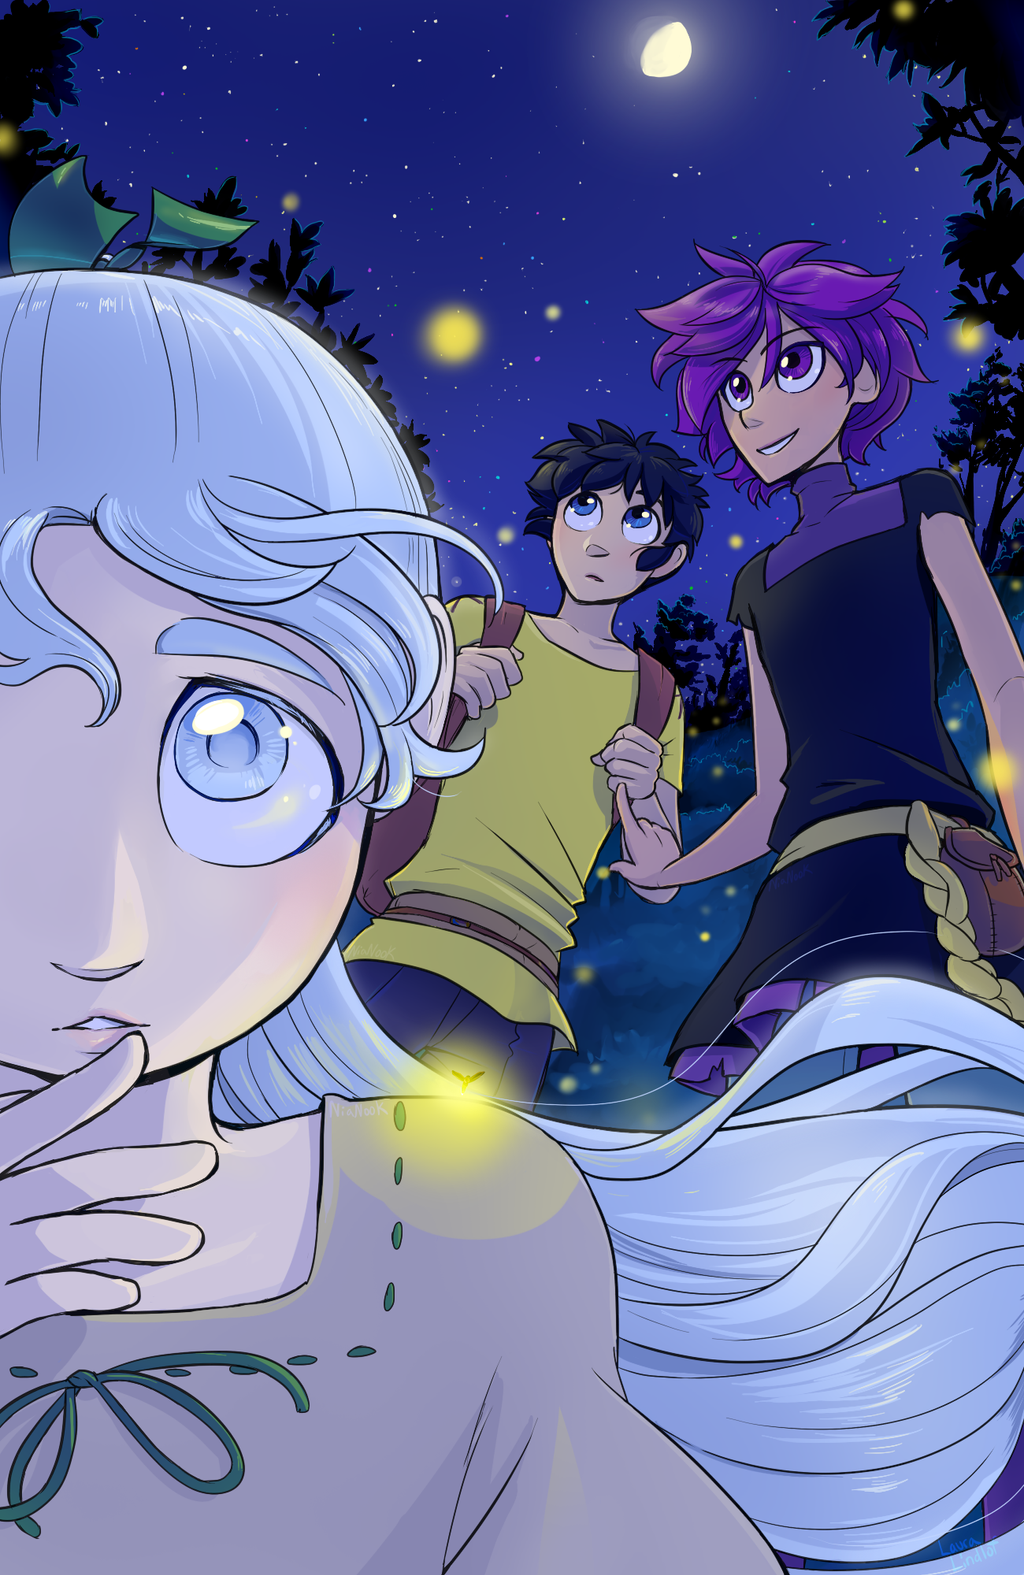 Sikue stares at the viewer with an unreadable expression. Behind her, Yokiro and Tatsuma gaze at the night sky, fireflies surrounding them in the forest.